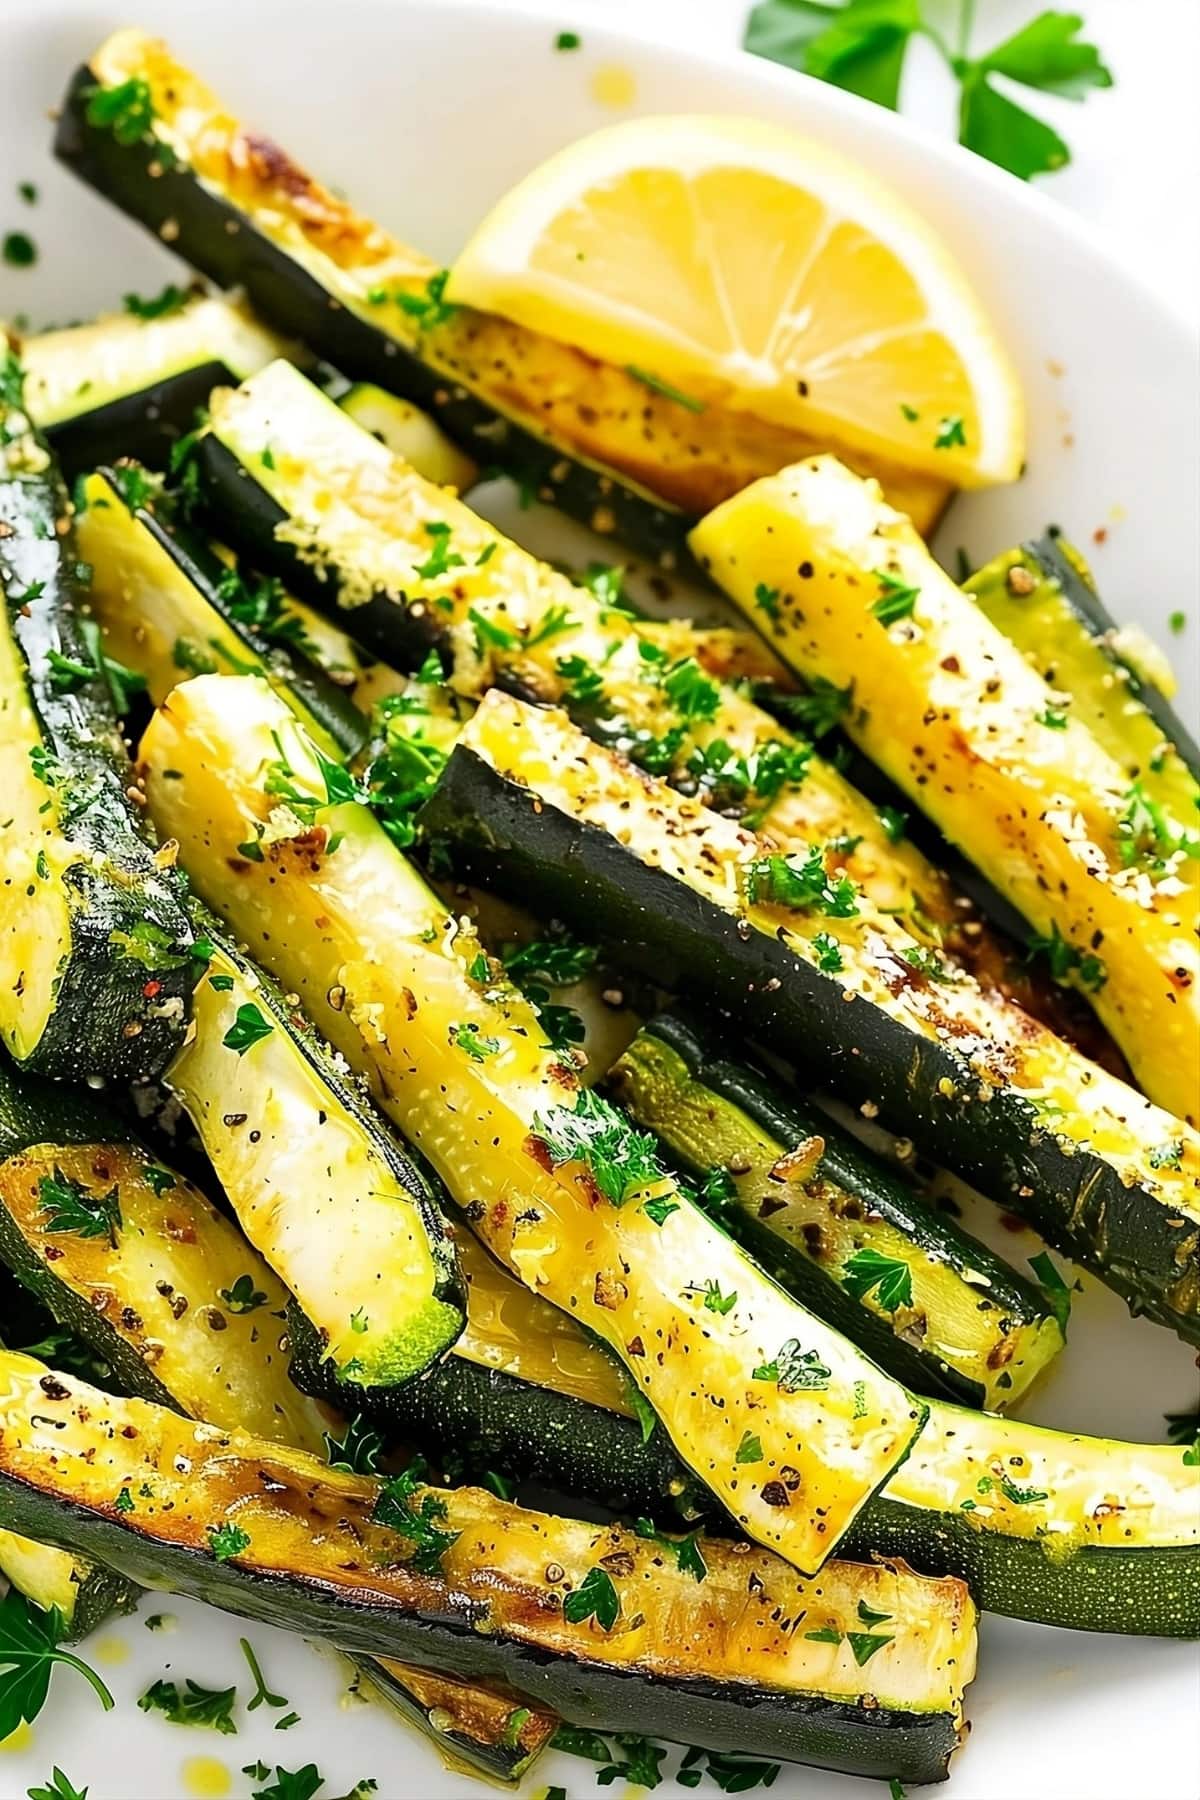 Roasted zucchini with chopped parsley garnish and slice of lemon on the side.